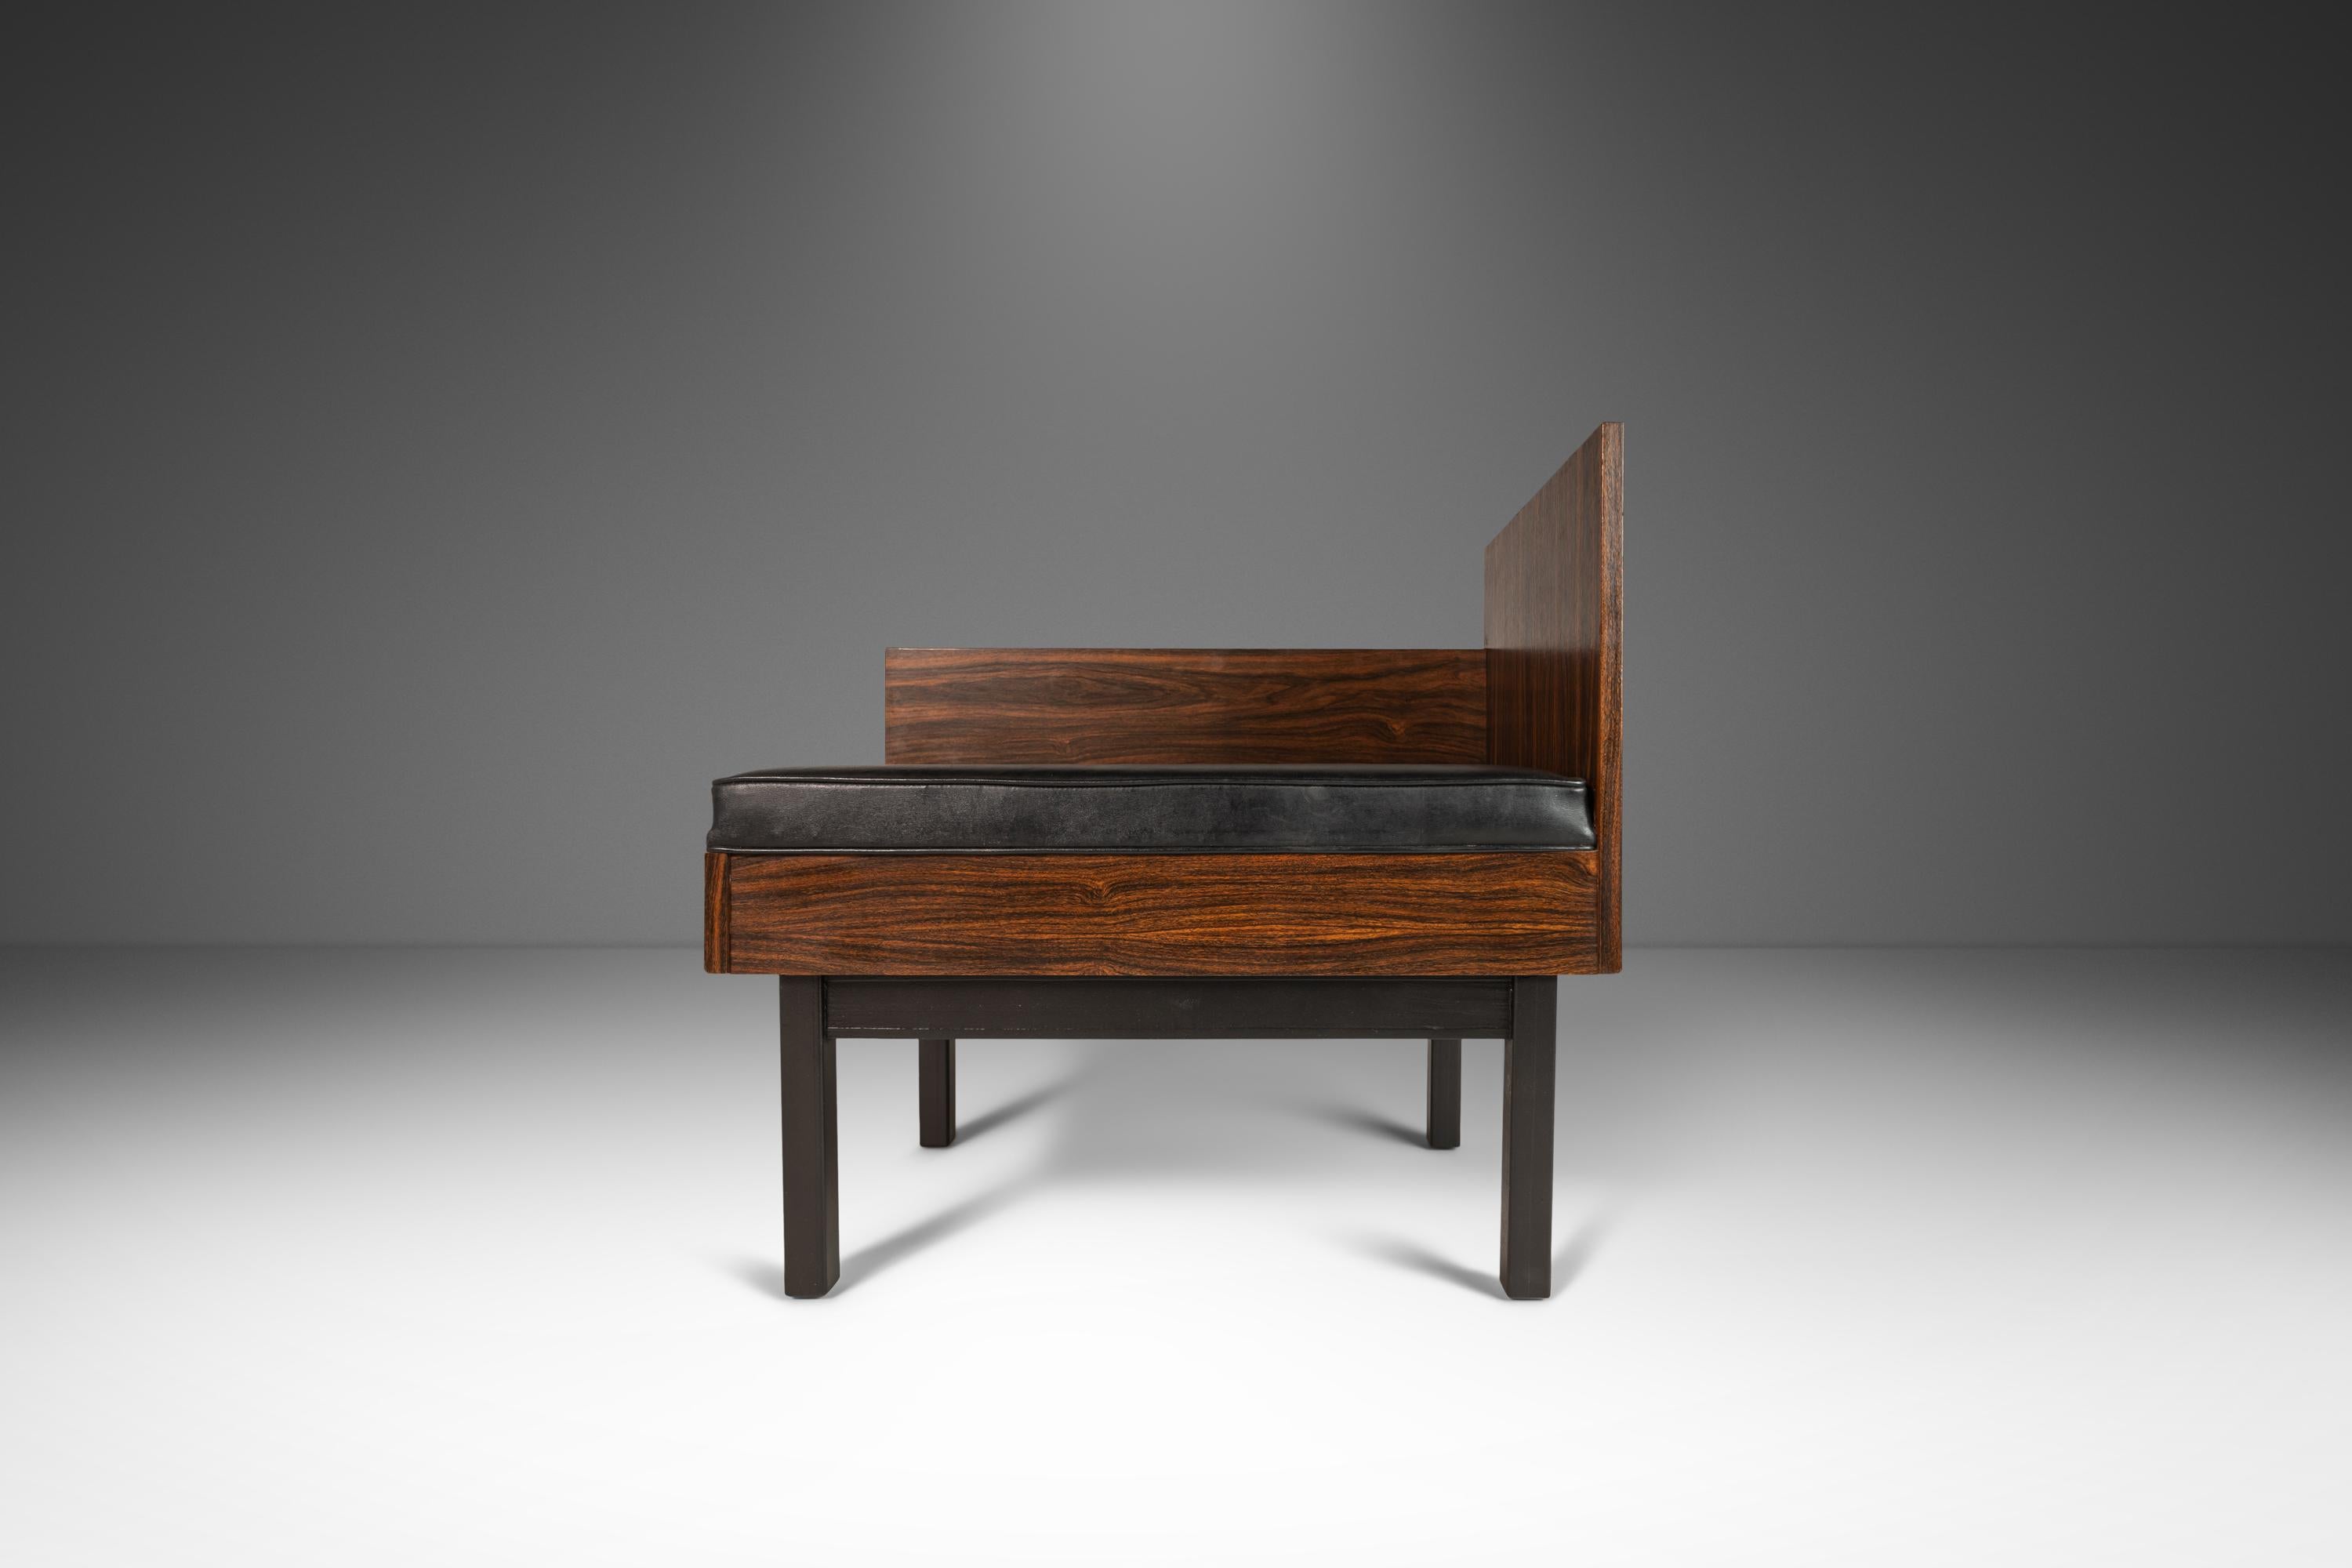 Set of Two ( 2 ) Modular Benches Kissing Benches in Rosewood Laminate, c. 1950's For Sale 2